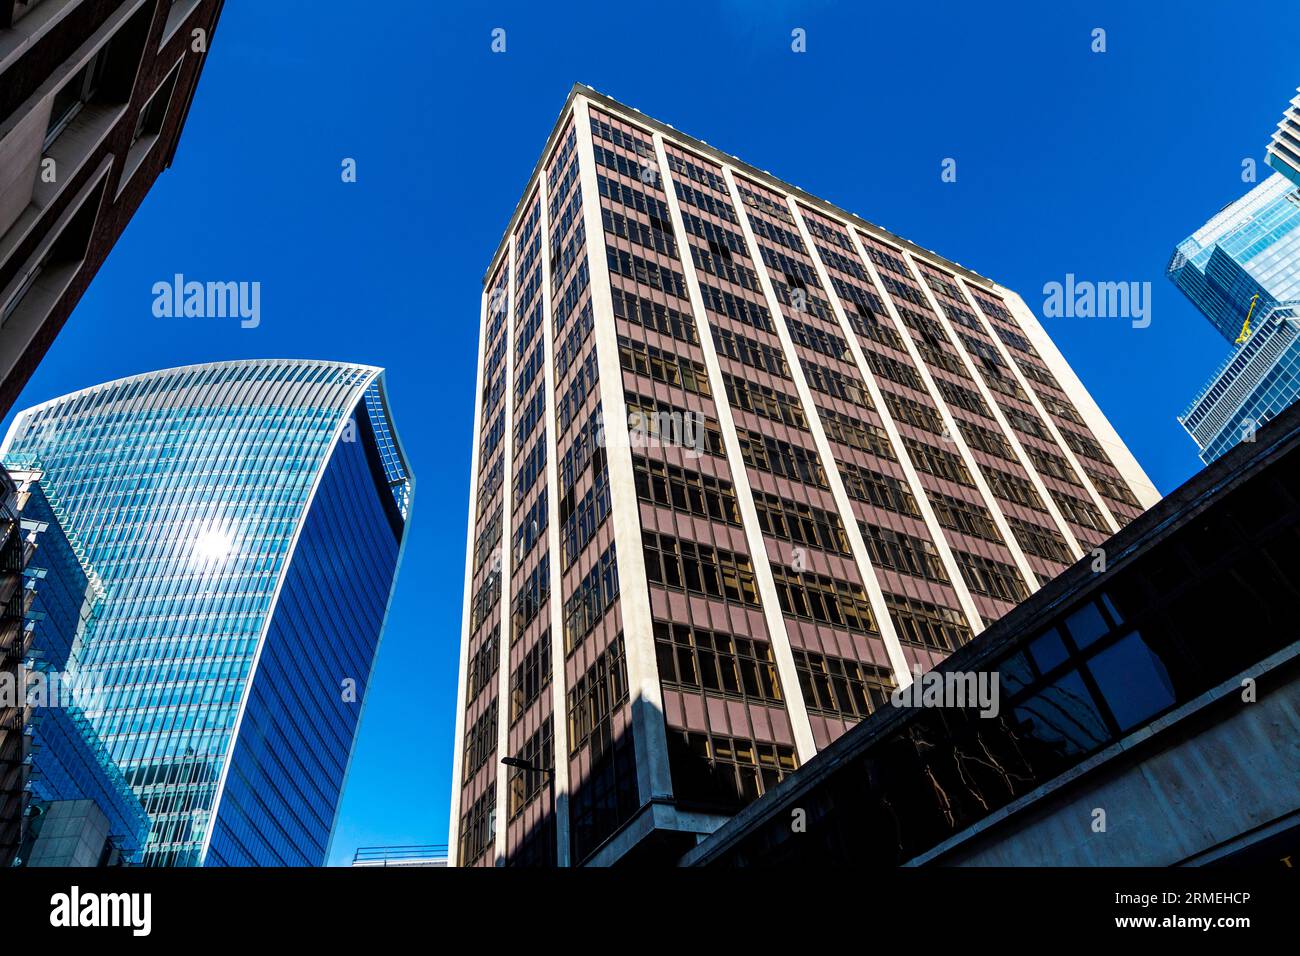 Exterior of 1950s podium tower Fountain House and the Walkie Talkie, Fenchurch Street, London, England Stock Photo